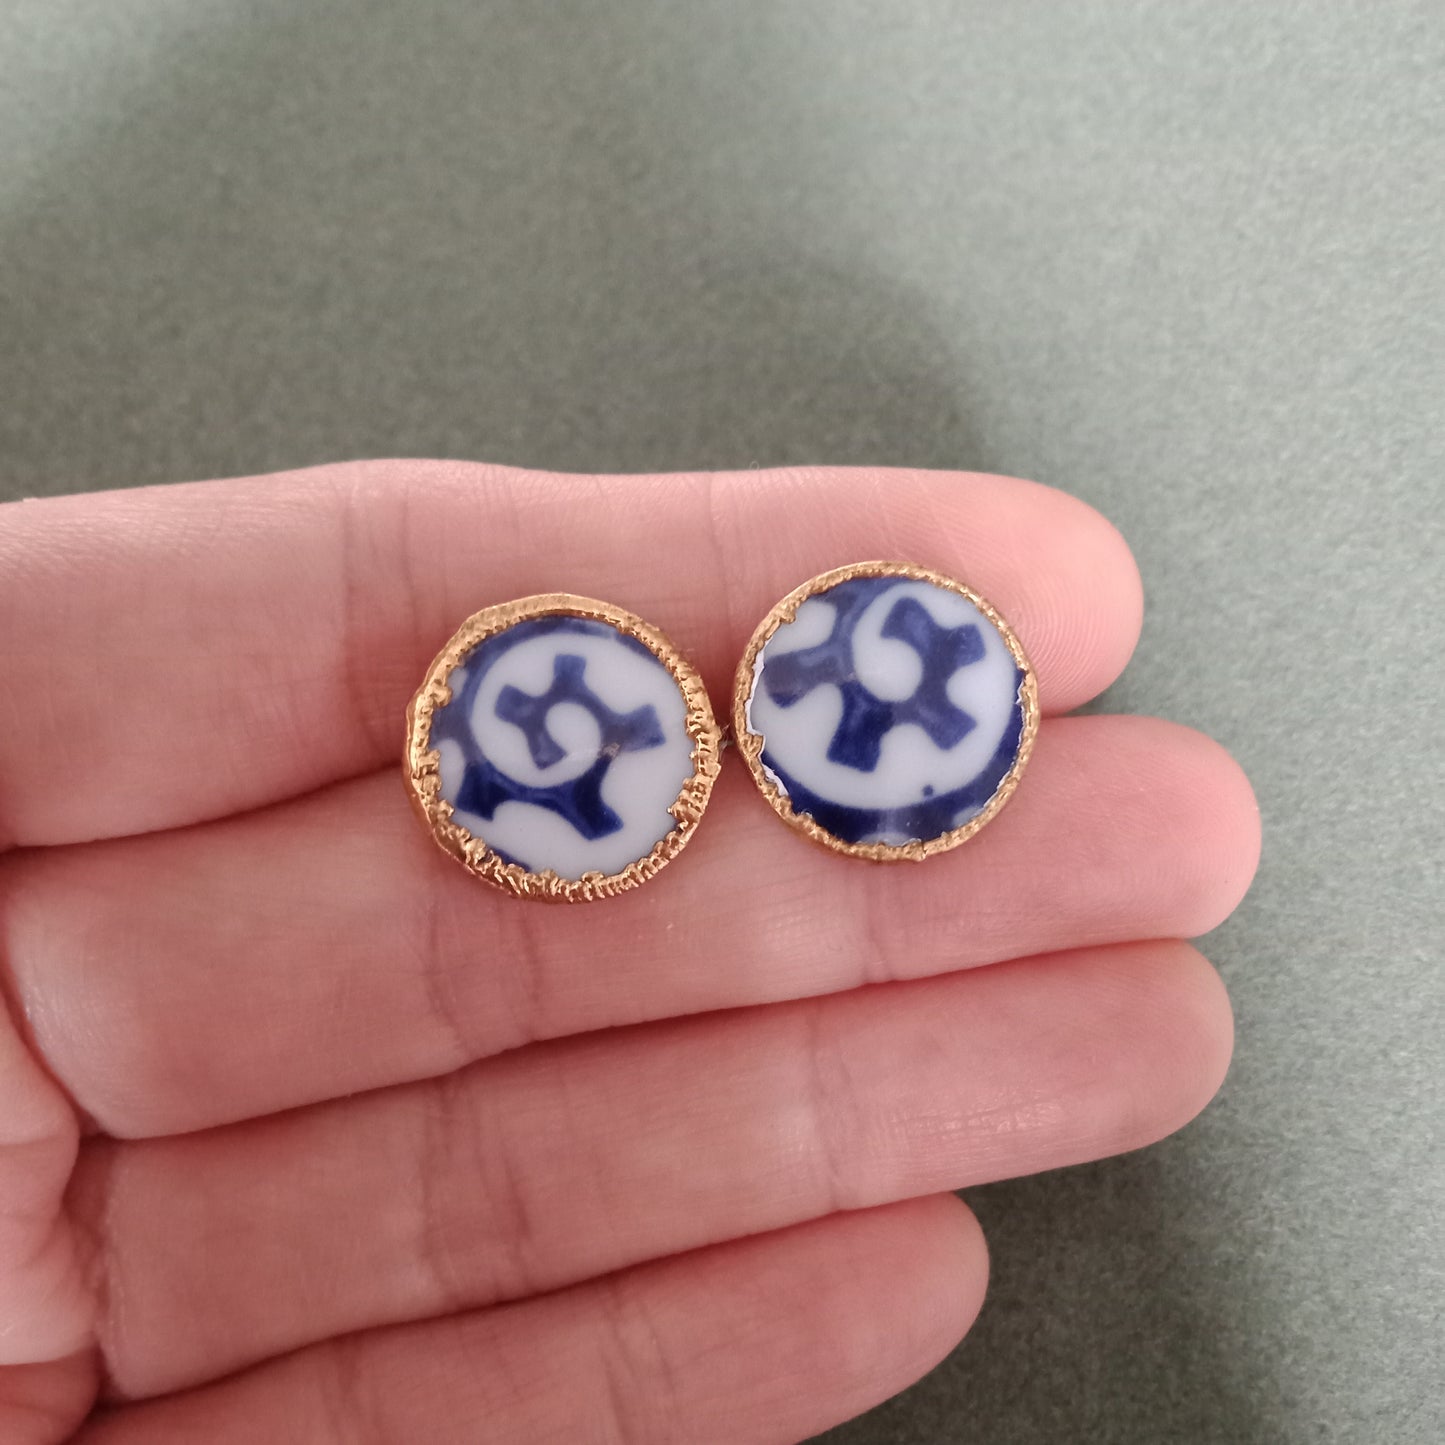 Abstract blue and white porcelain stud earrings